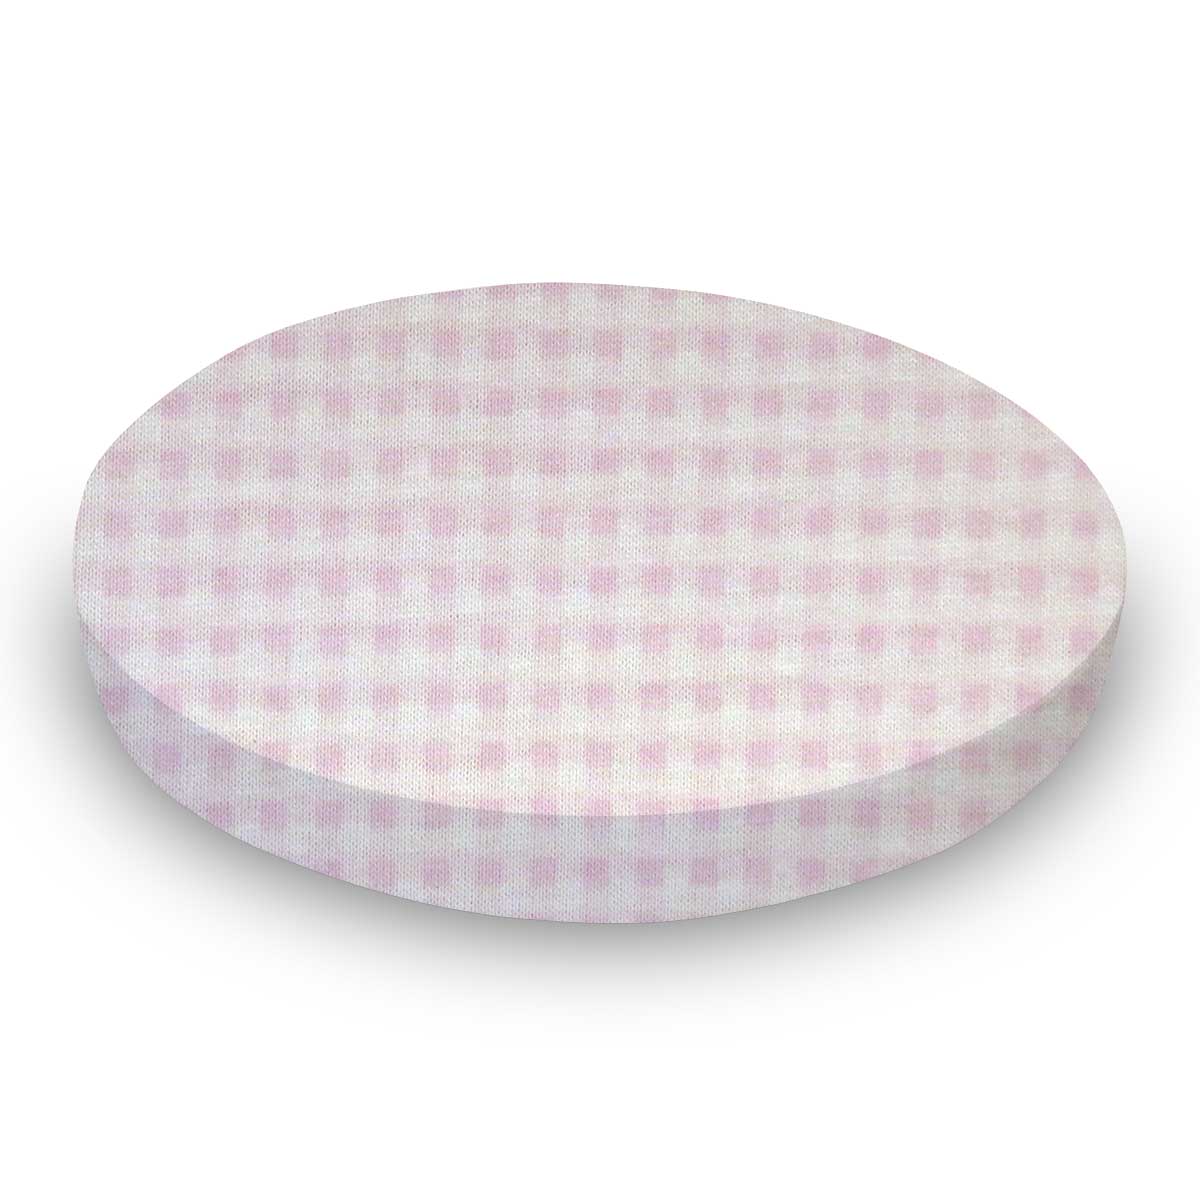 Oval Crib (Stokke Sleepi) - Pink Gingham Jersey Knit - Fitted  Oval